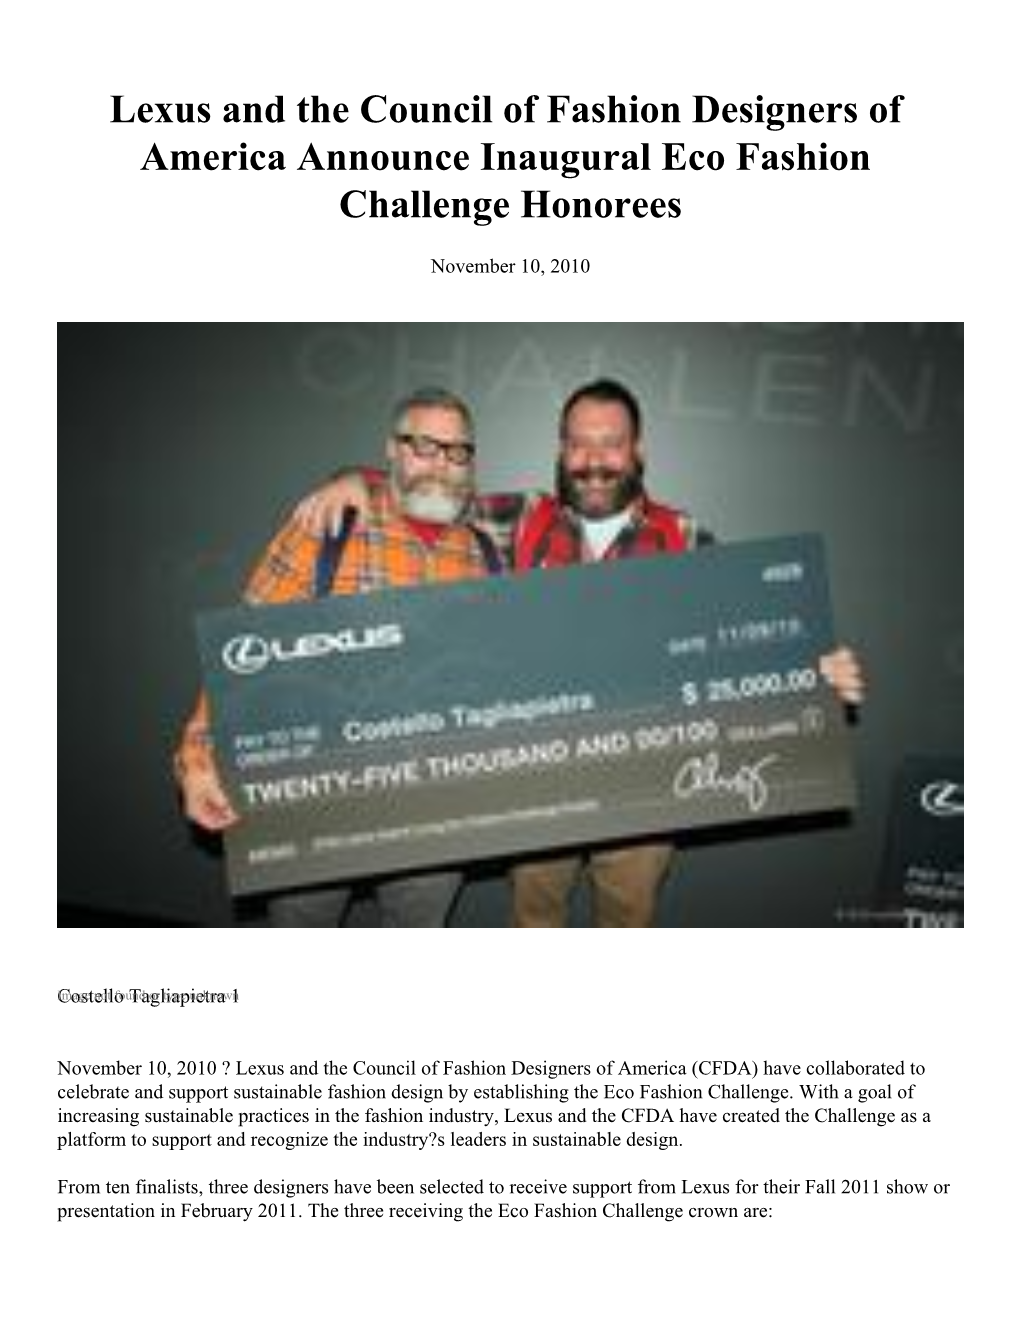 Lexus and the Council of Fashion Designers of America Announce Inaugural Eco Fashion Challenge Honorees